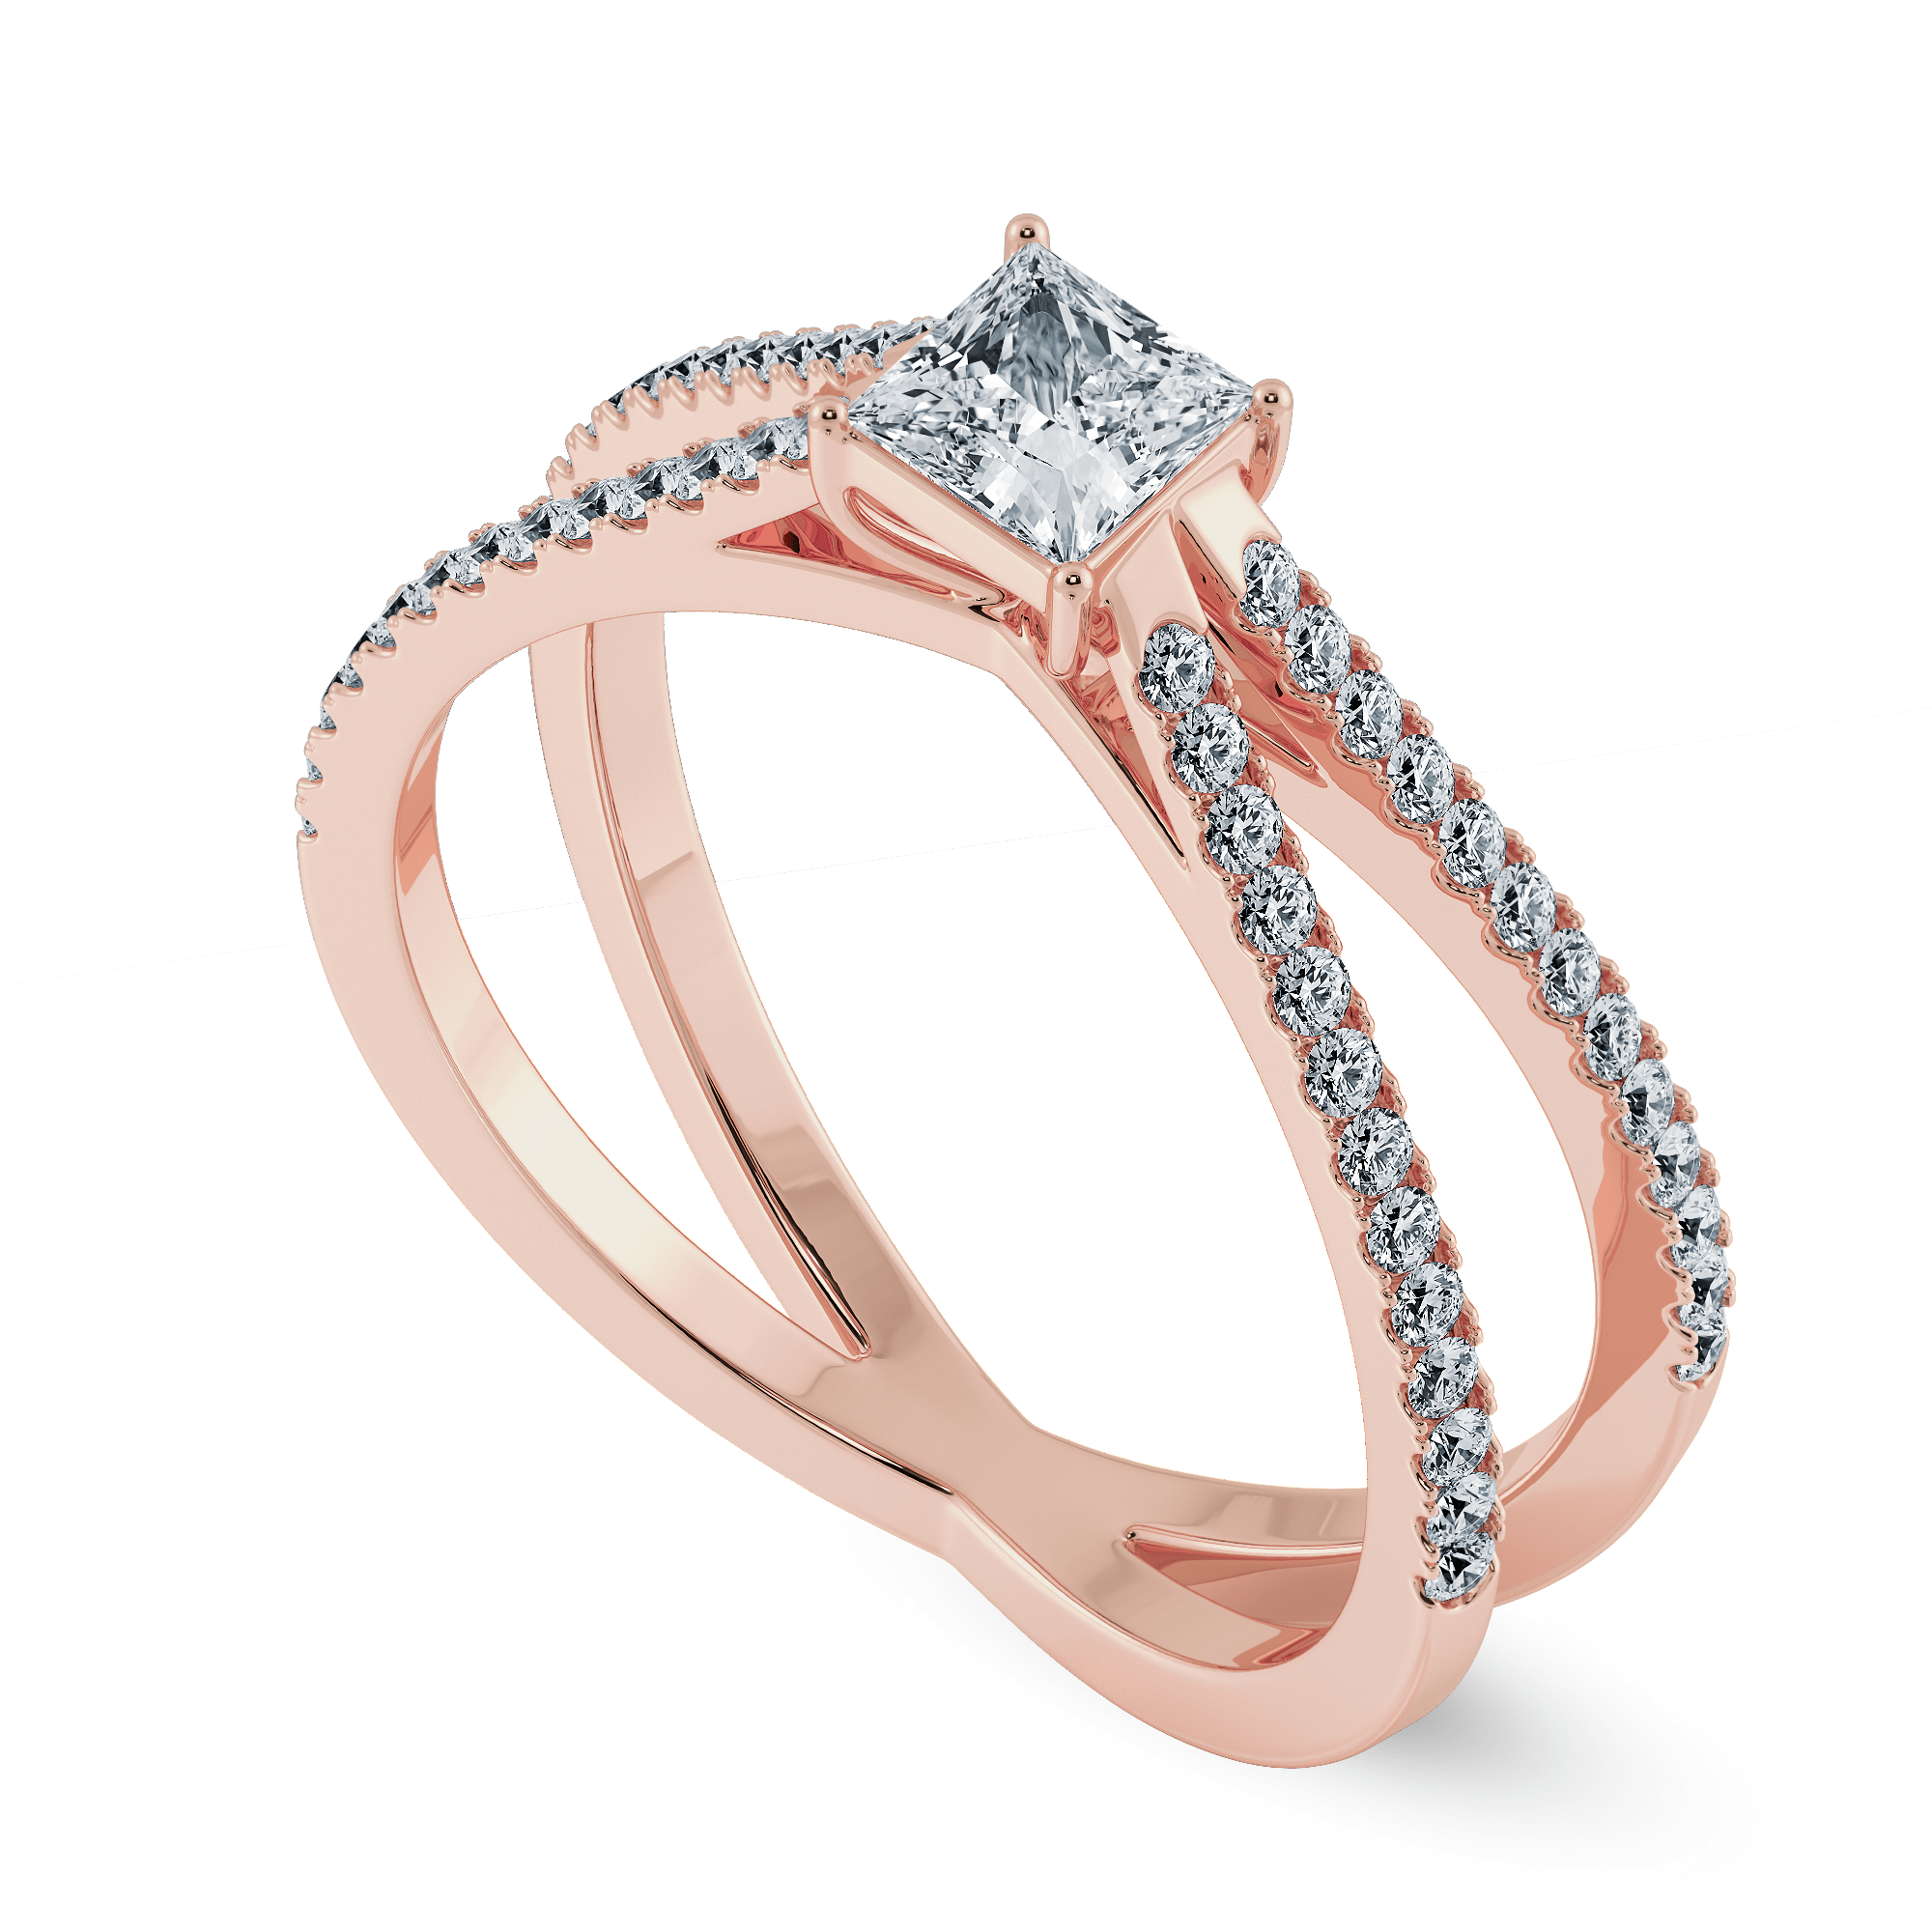 Offset Ring in 18K Rose Gold with 0.27ct Shield Shaped Diamond – Eva Fehren